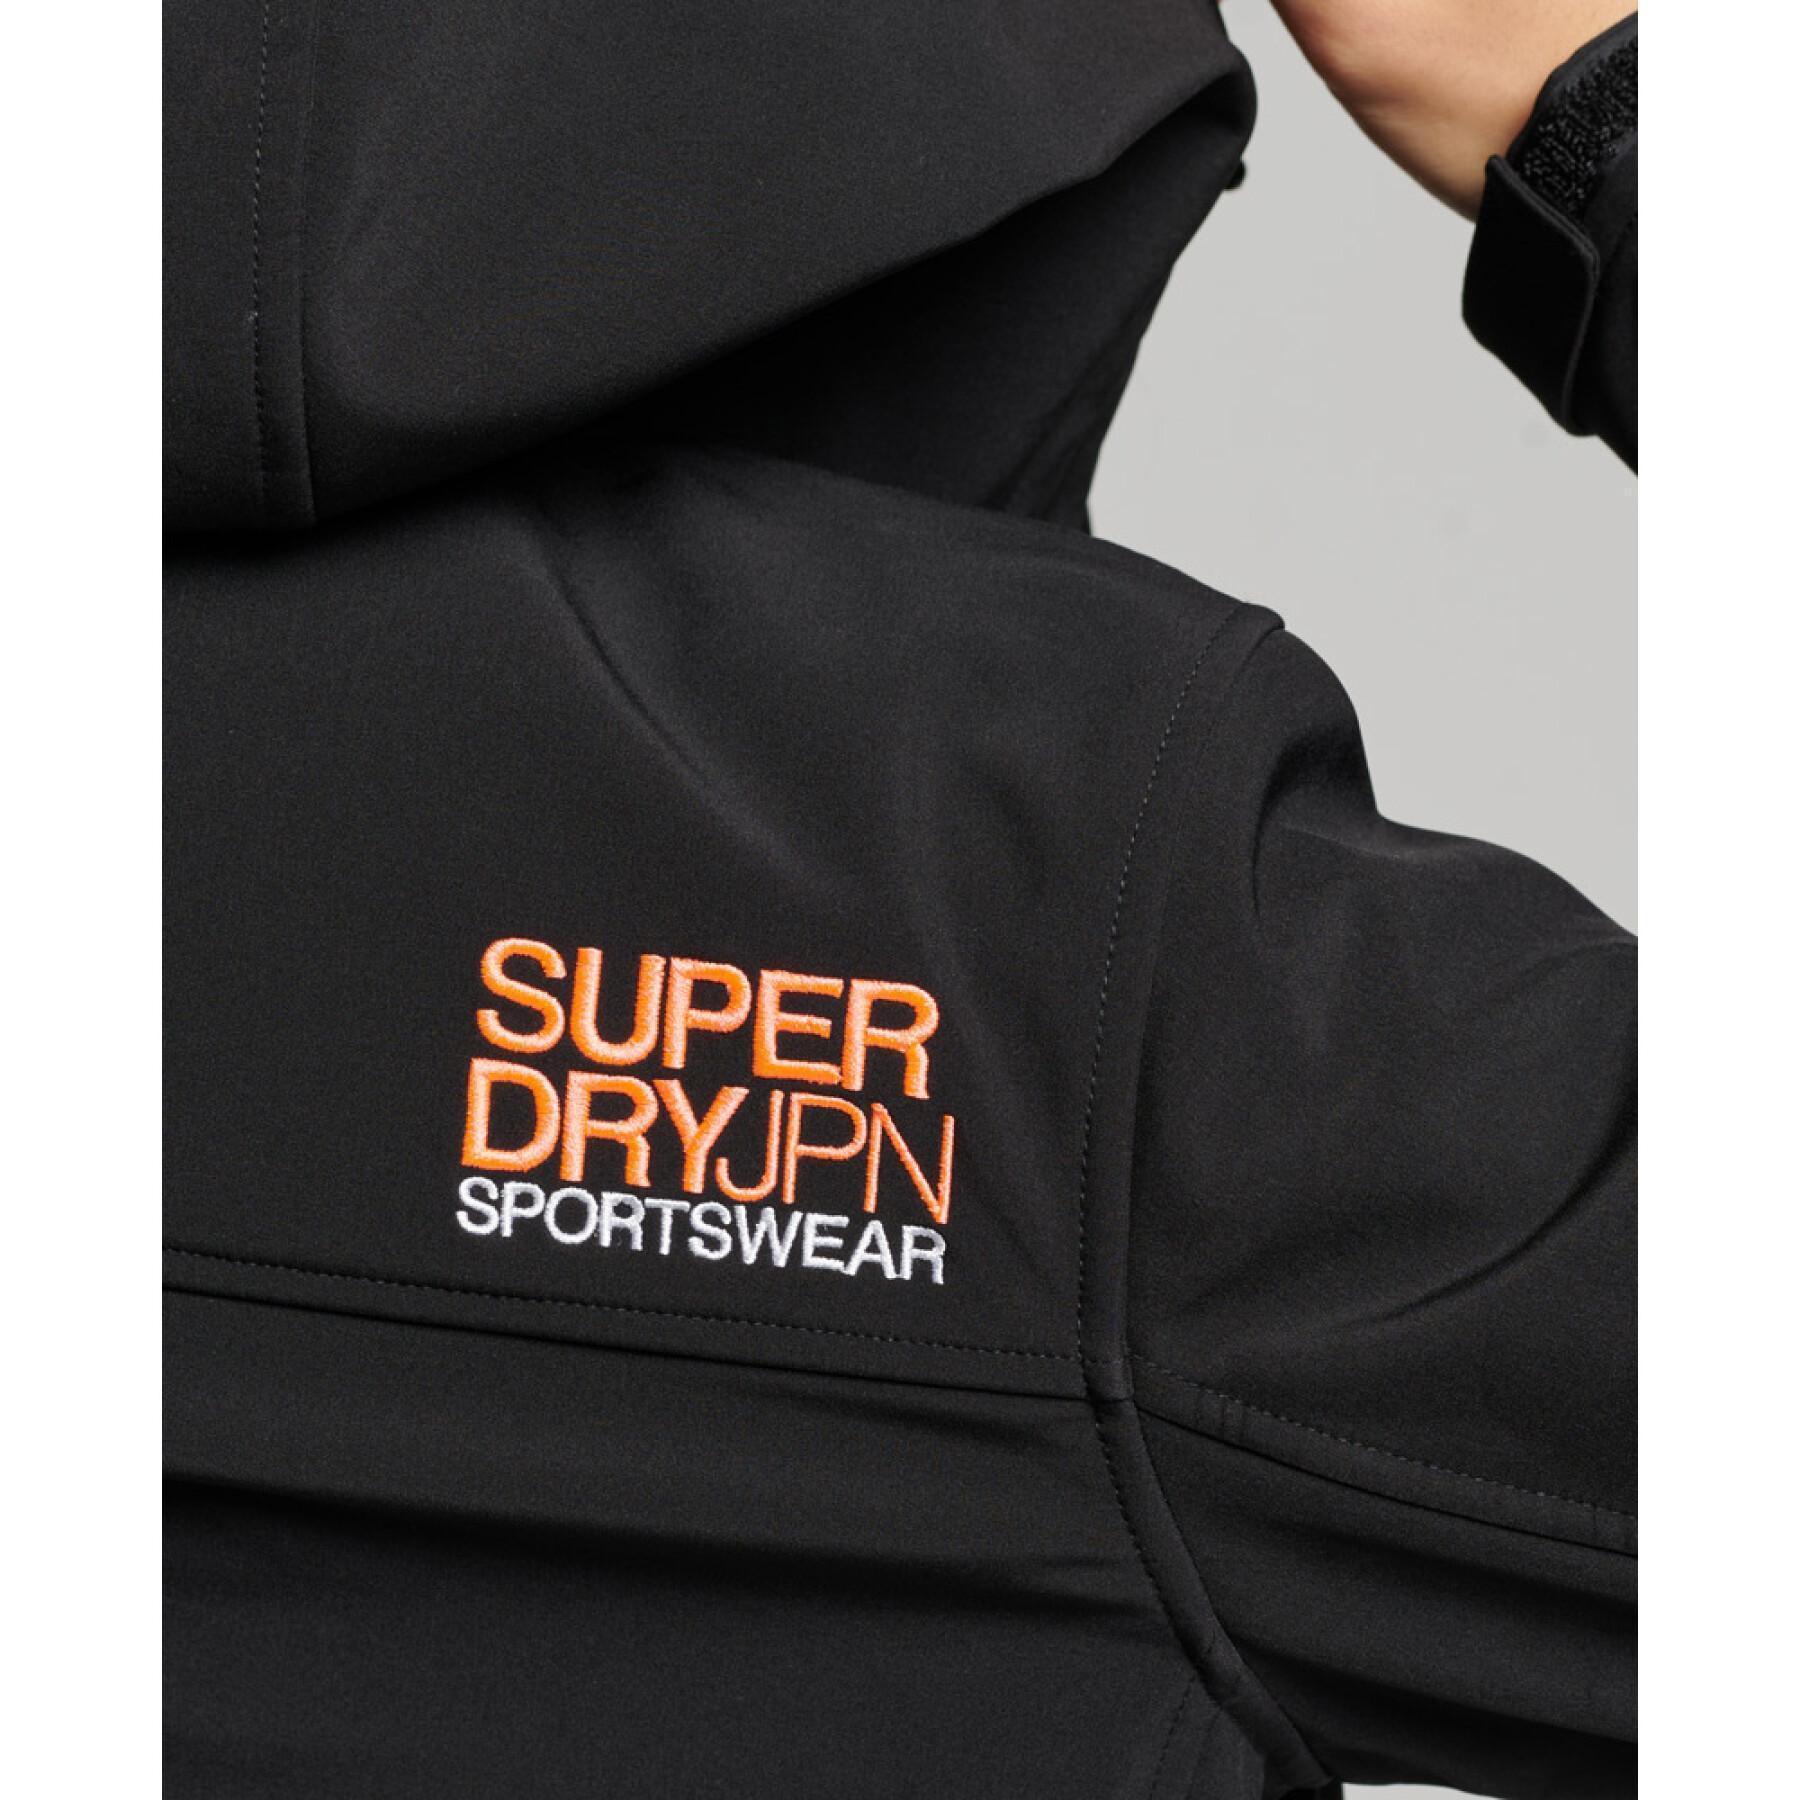 Chaqueta impermeable con capucha softshell mujer Superdry Code Trekker